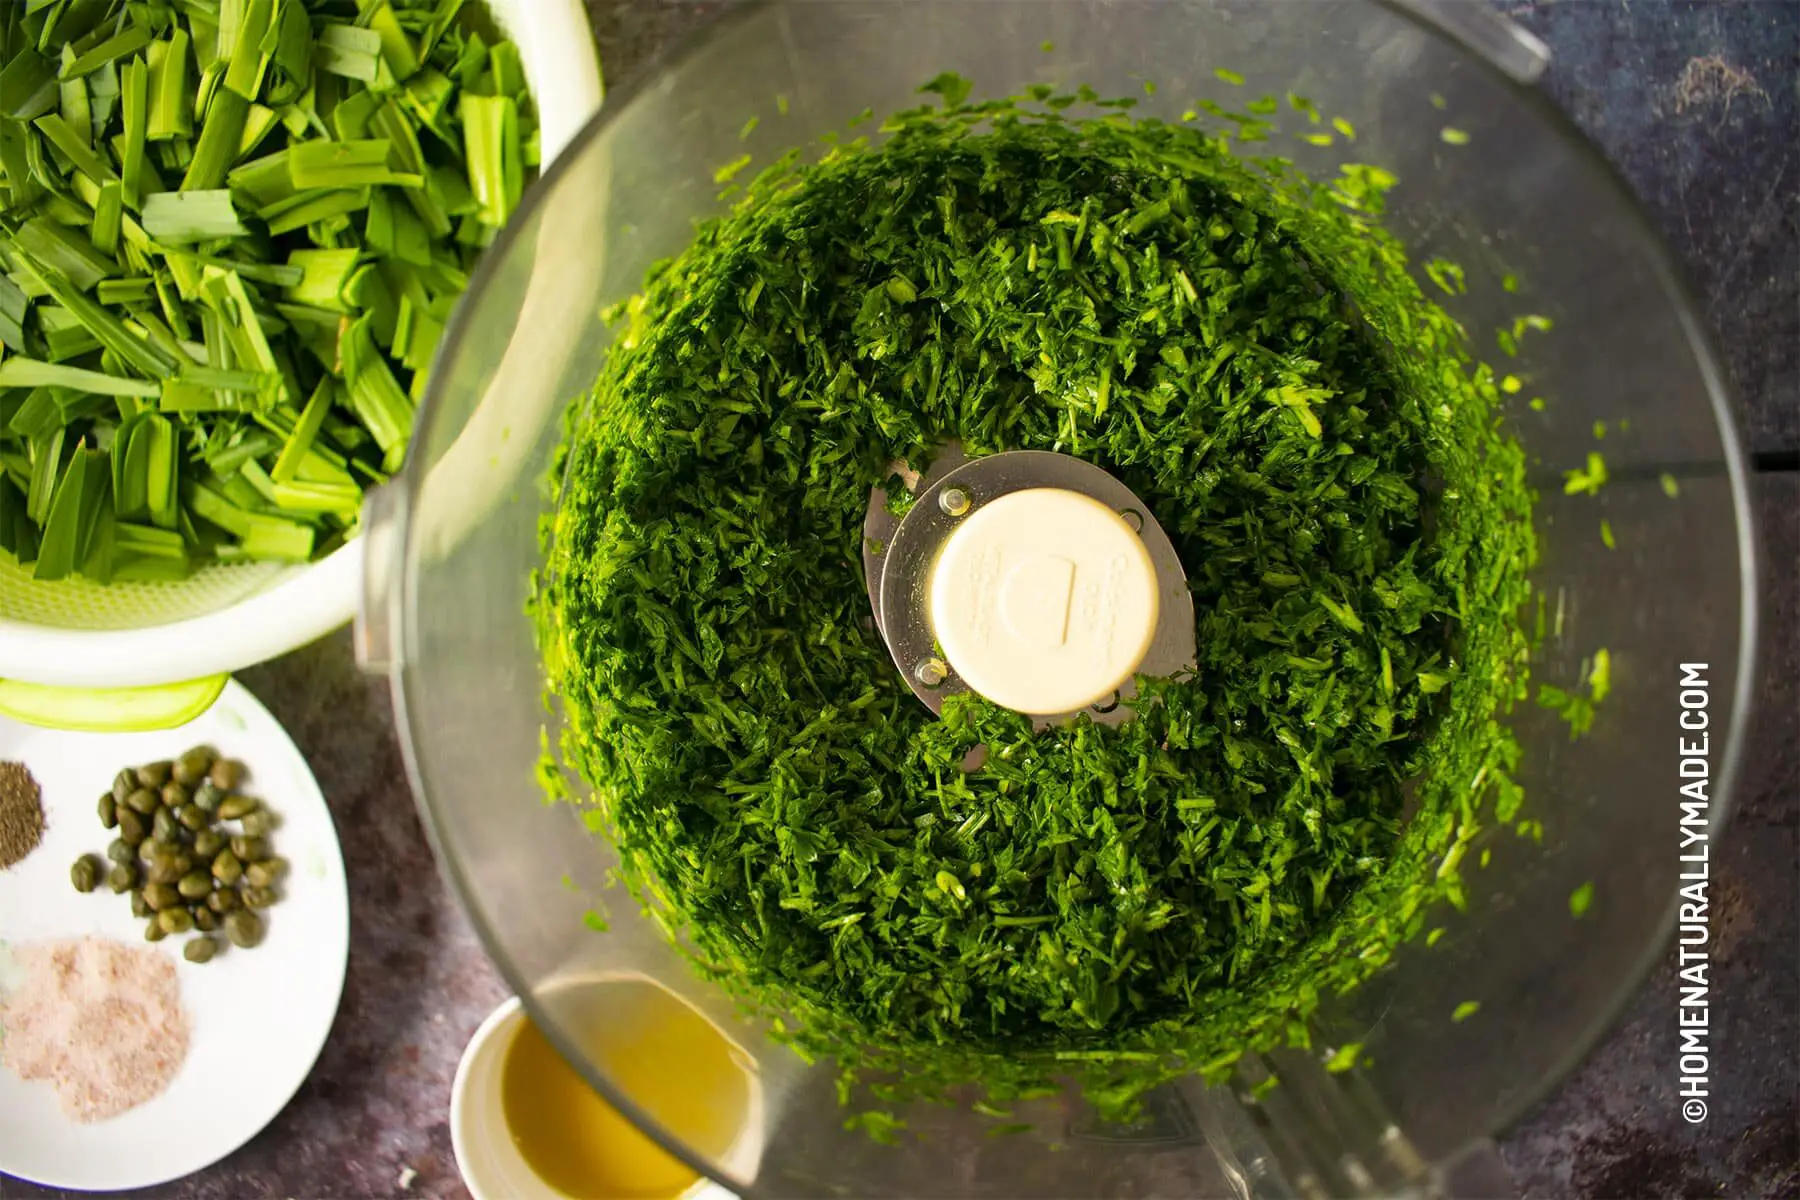 Use food processor to finely chop parsley